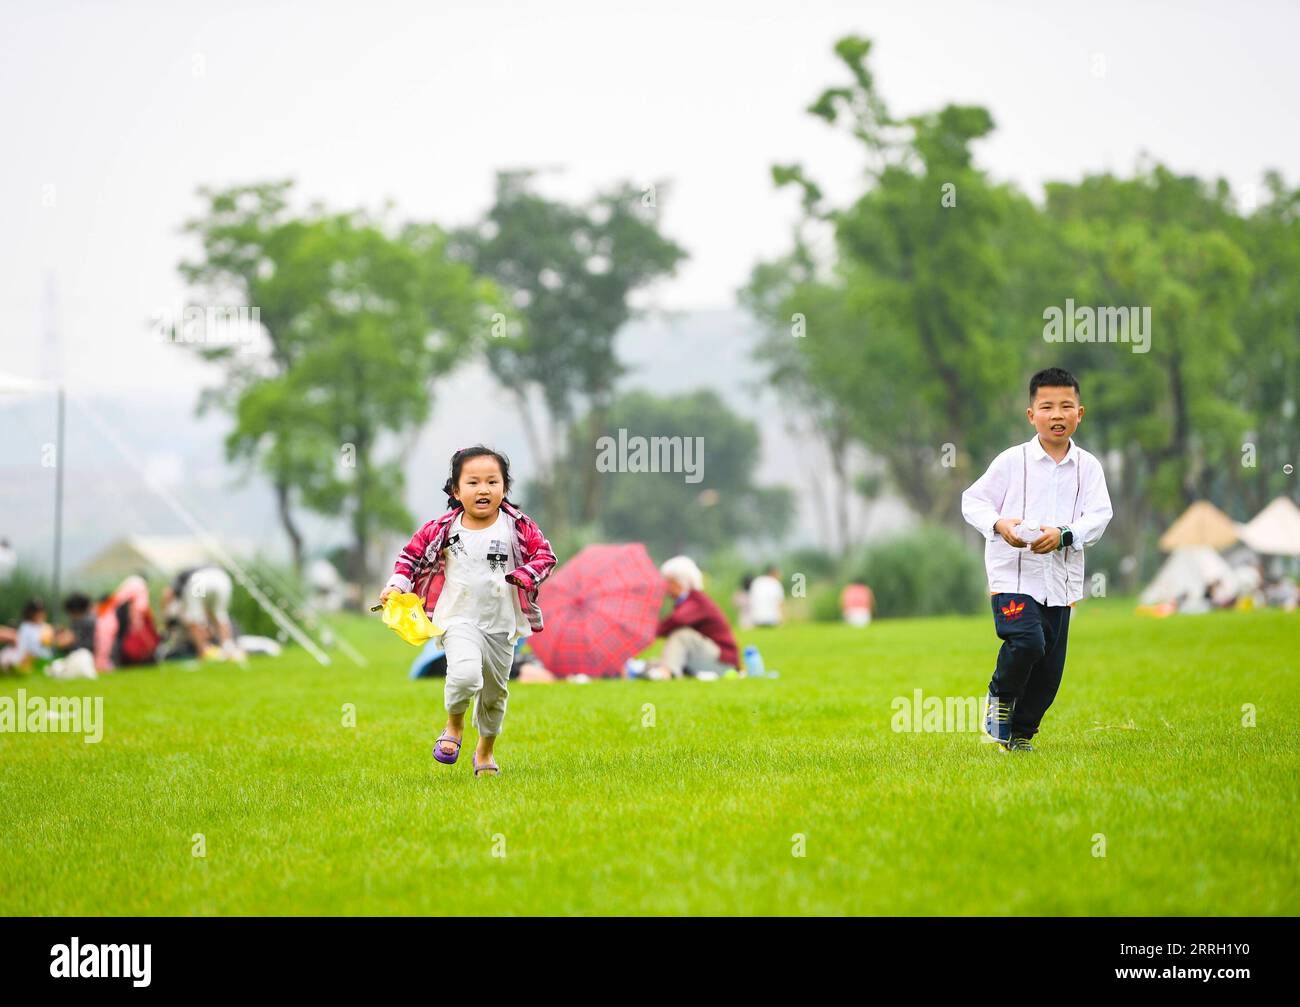 220608 -- CHONGQING, June 8, 2022 -- Children have fun in Guangyang Isle in southwest China s Chongqing, June 5, 2022. Guangyang Isle, the largest island on the upper Yangtze River, is rich in natural resources. In recent years, a series of measures have been taken to restore the island s ecological environment, attracting tourists to its colorful fields.  CHINA-CHONGQING-GUANGYANG ISLE-TOURISM CN WangxQuanchao PUBLICATIONxNOTxINxCHN Stock Photo